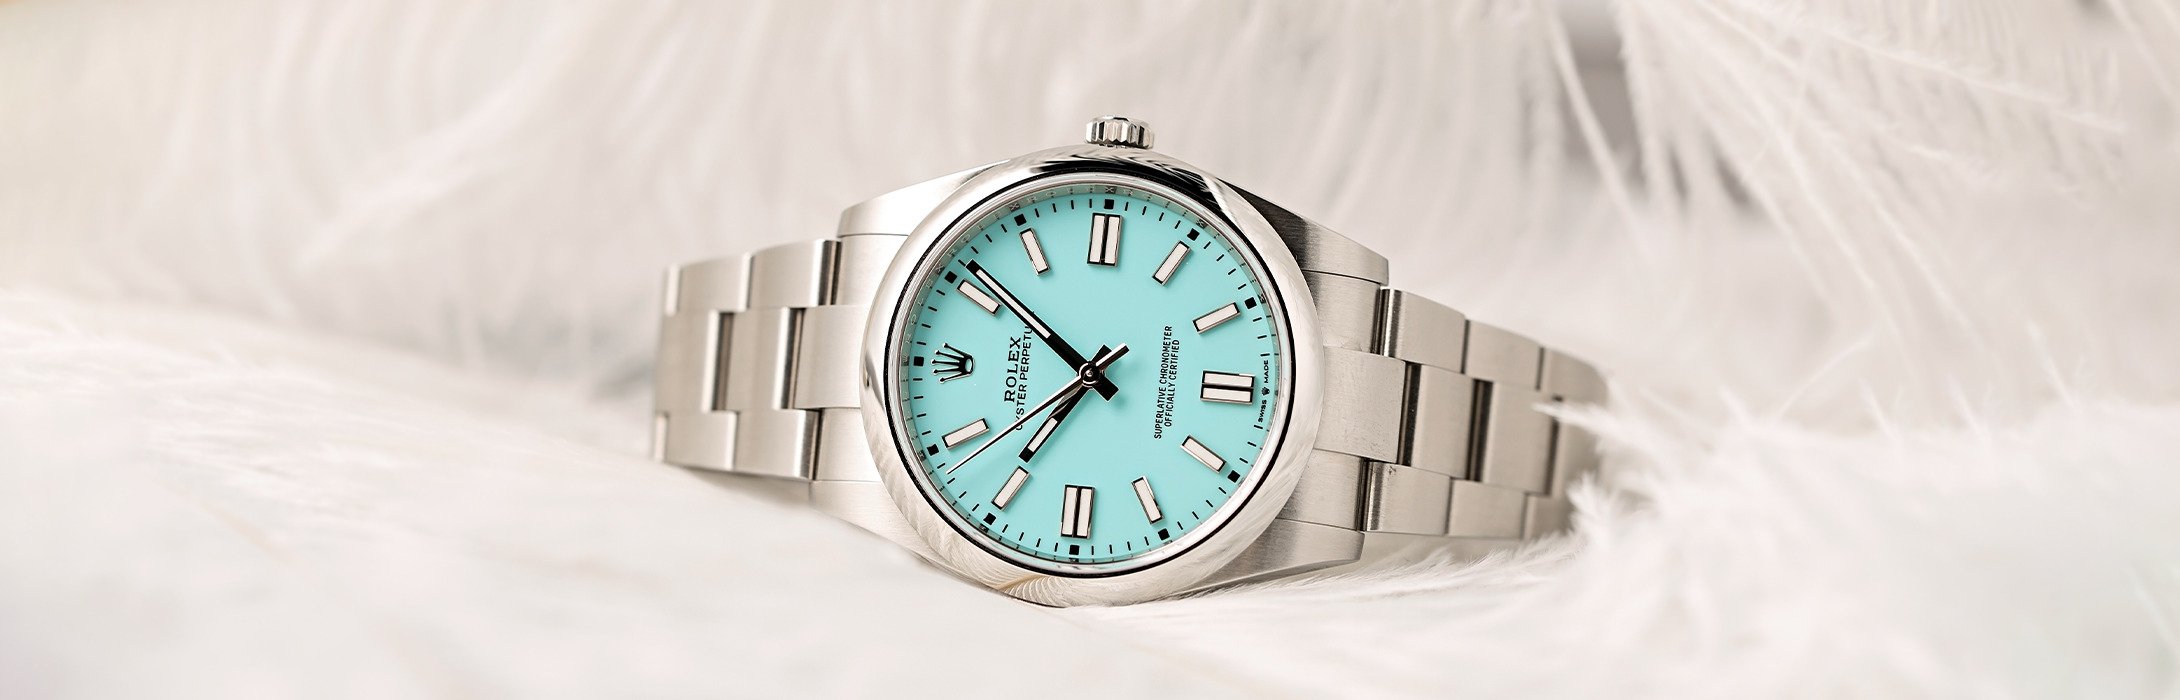 The Tiffany & Co. CT60 Collection (Live Pics, Specs, & Pricing) - Hodinkee